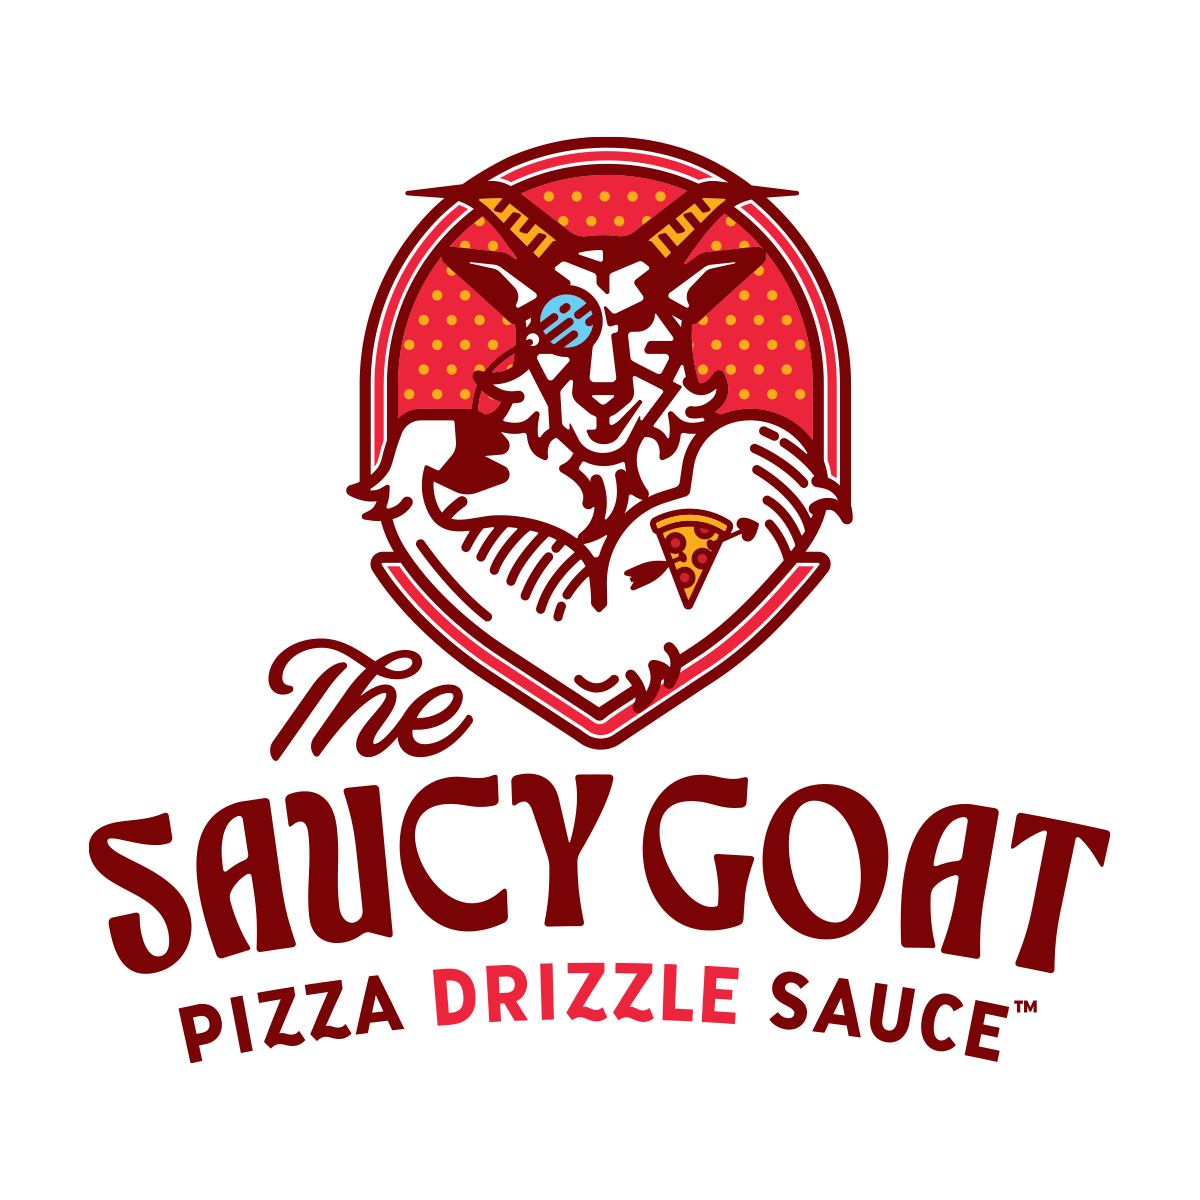 The Saucy Goat logo design by logo designer TrioSigns,Inc. for your inspiration and for the worlds largest logo competition